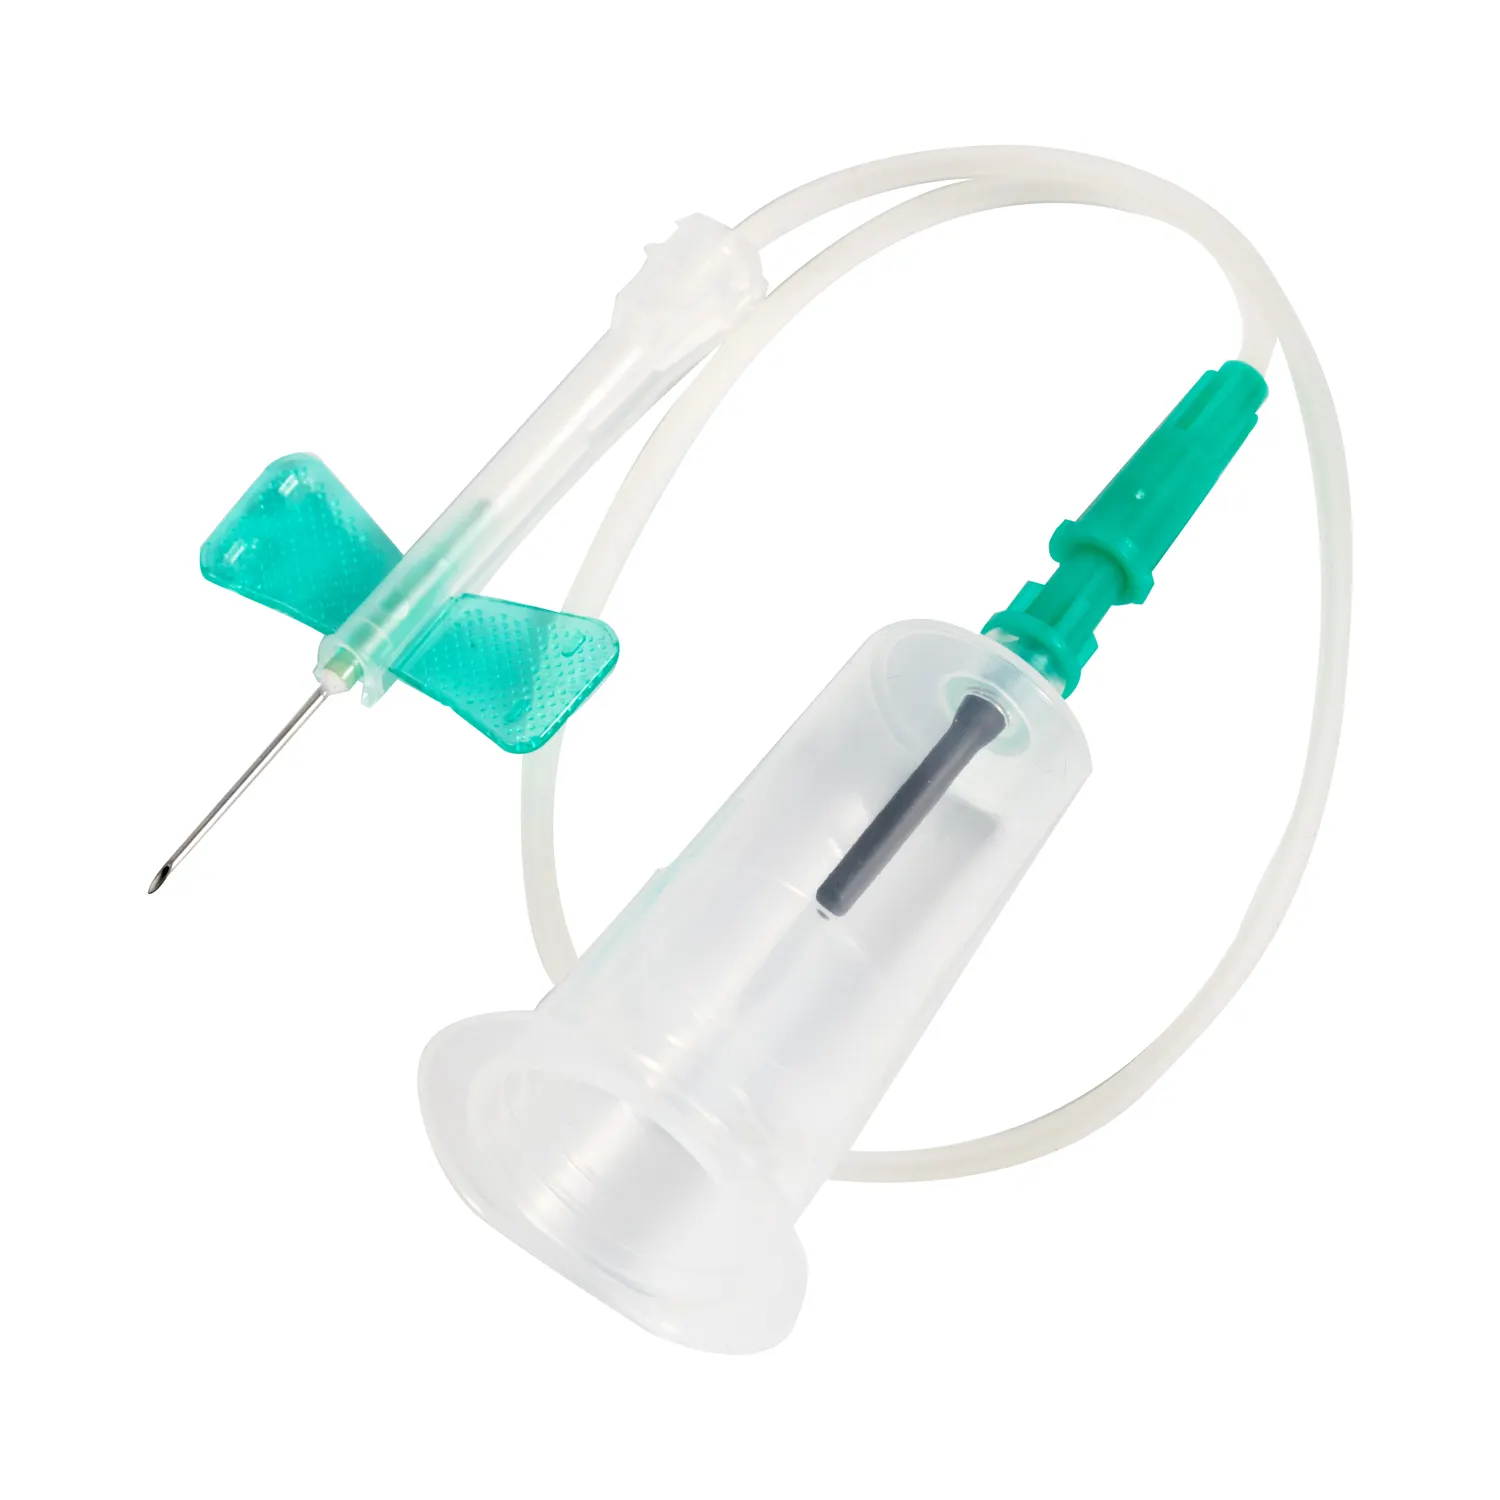 Medical Safety Vacuum Blood Collection Disposable Butterfly Needle with holder and without holder